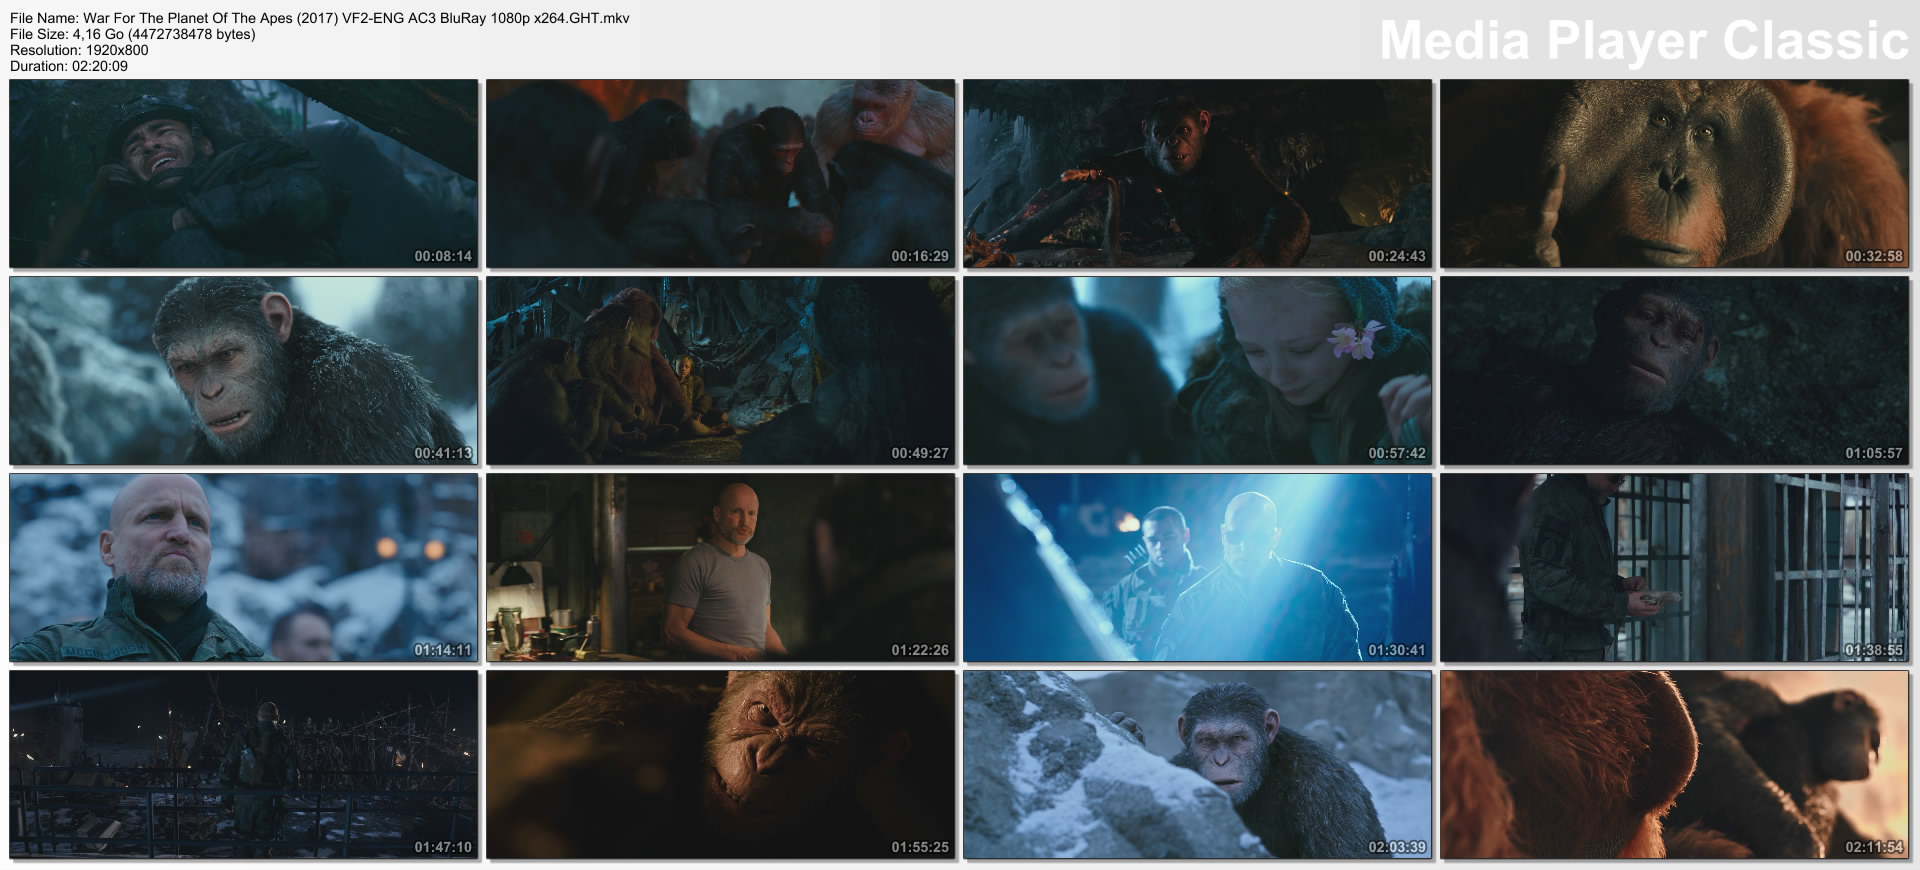 War For The Planet Of The Apes (2017) VF2-ENG AC3 BluRay 1080p x264.GHT